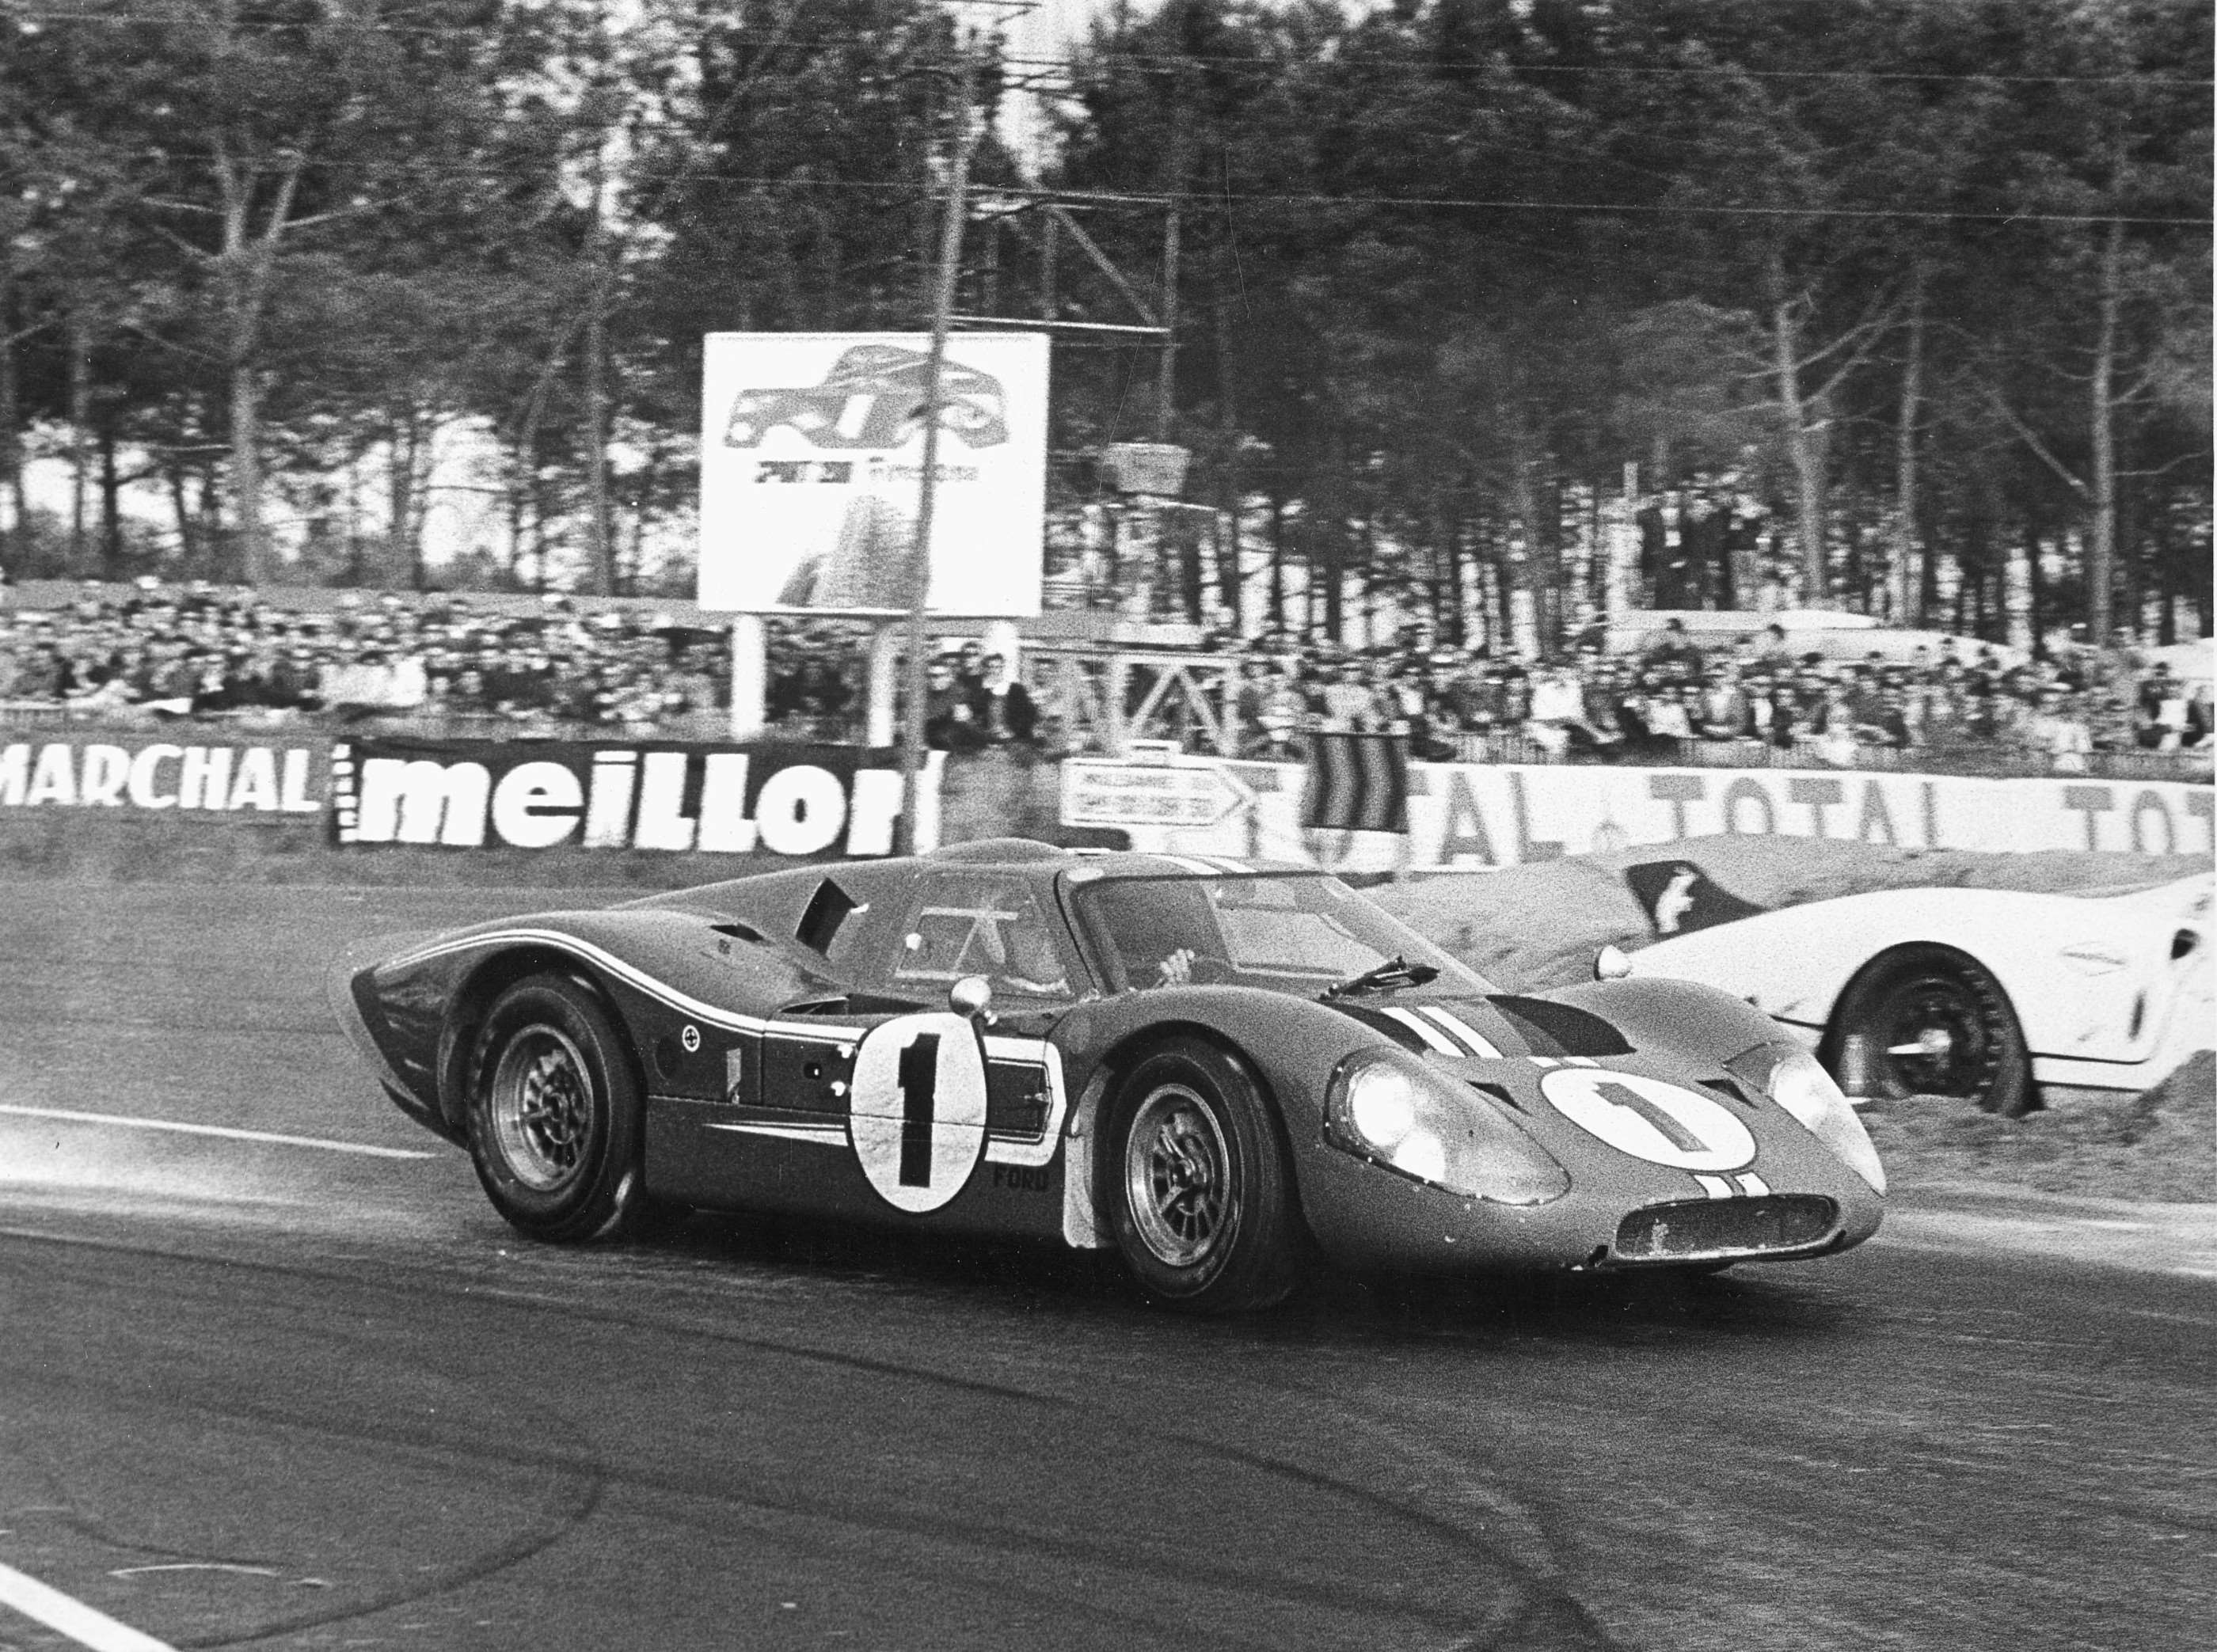 By 1967 the innovative Le Mans-winning Ford Mark IVs had roll-over structures, honeycomb panelling, and full seat belt harnesses as standard - Le Mans winner A.J. Foyt in command here of the Mk IV co-driven by Dan Gurney.